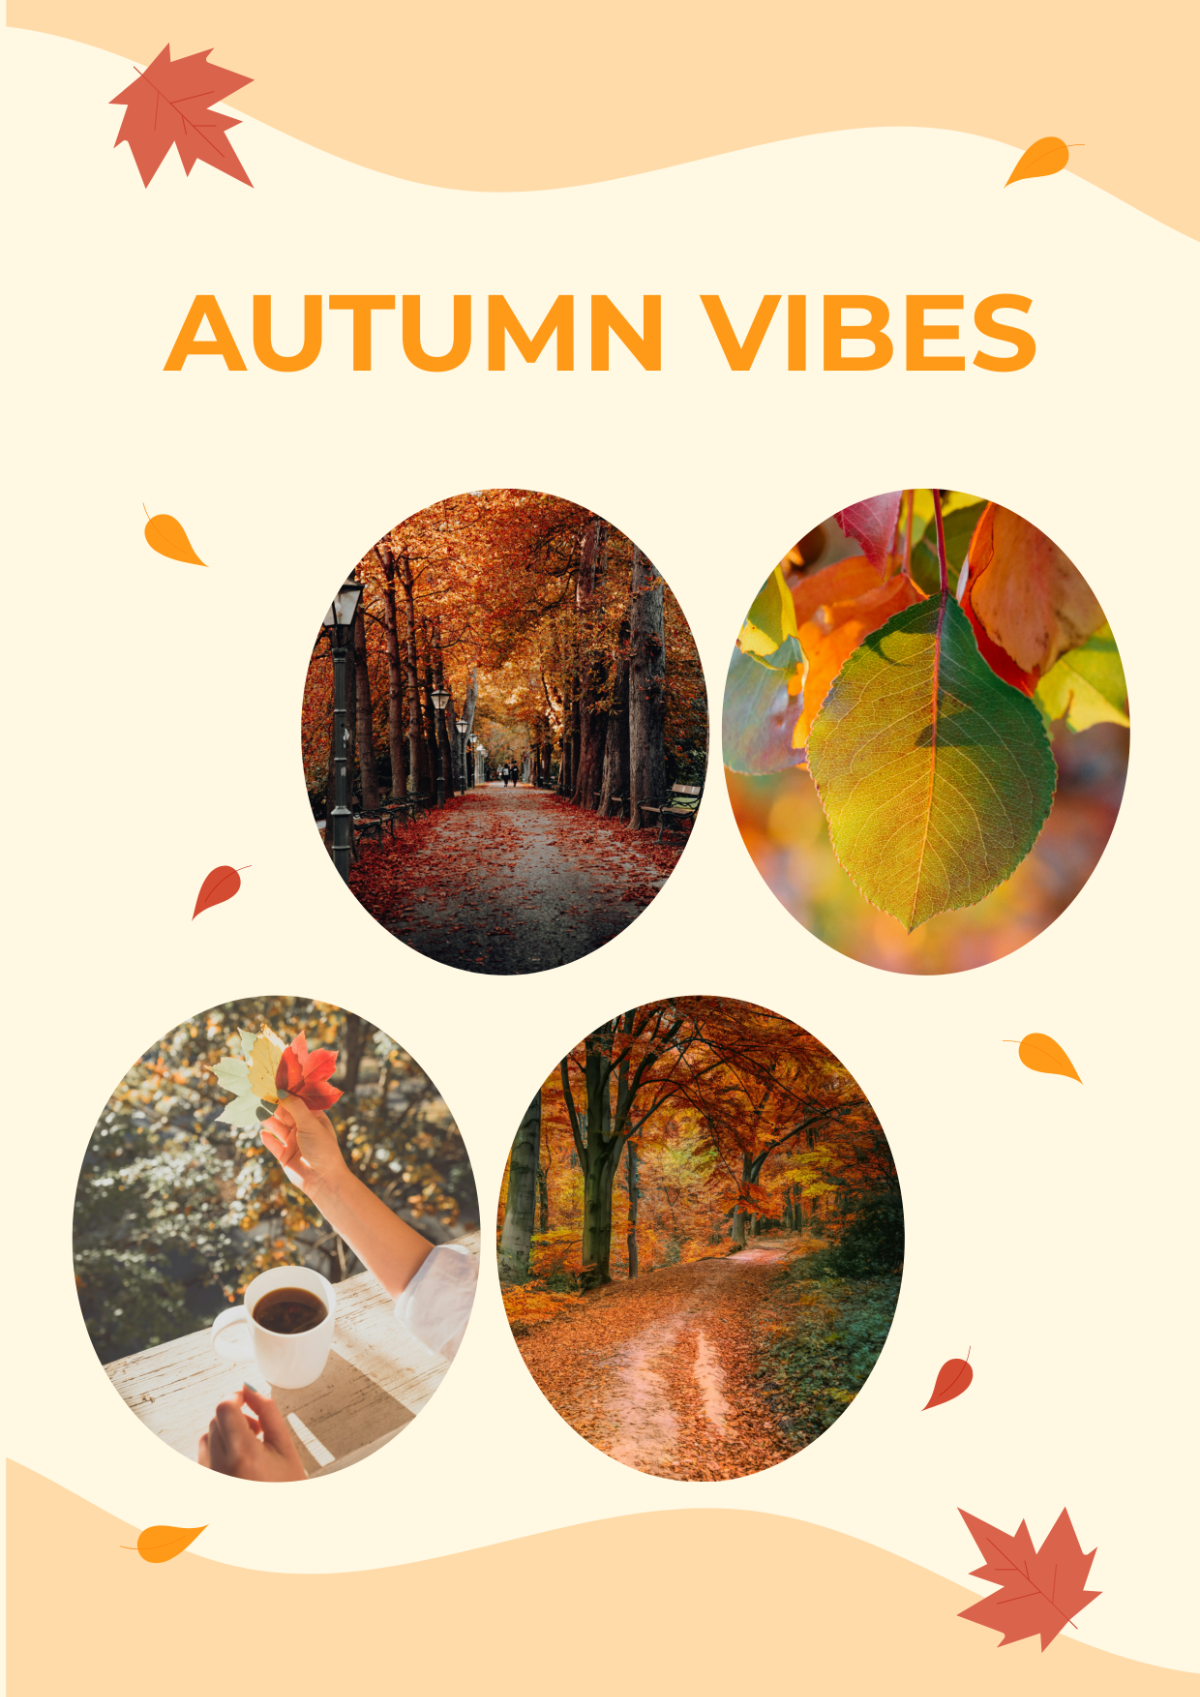 Free Autumn Vibe Inspiration Photo Collage Template